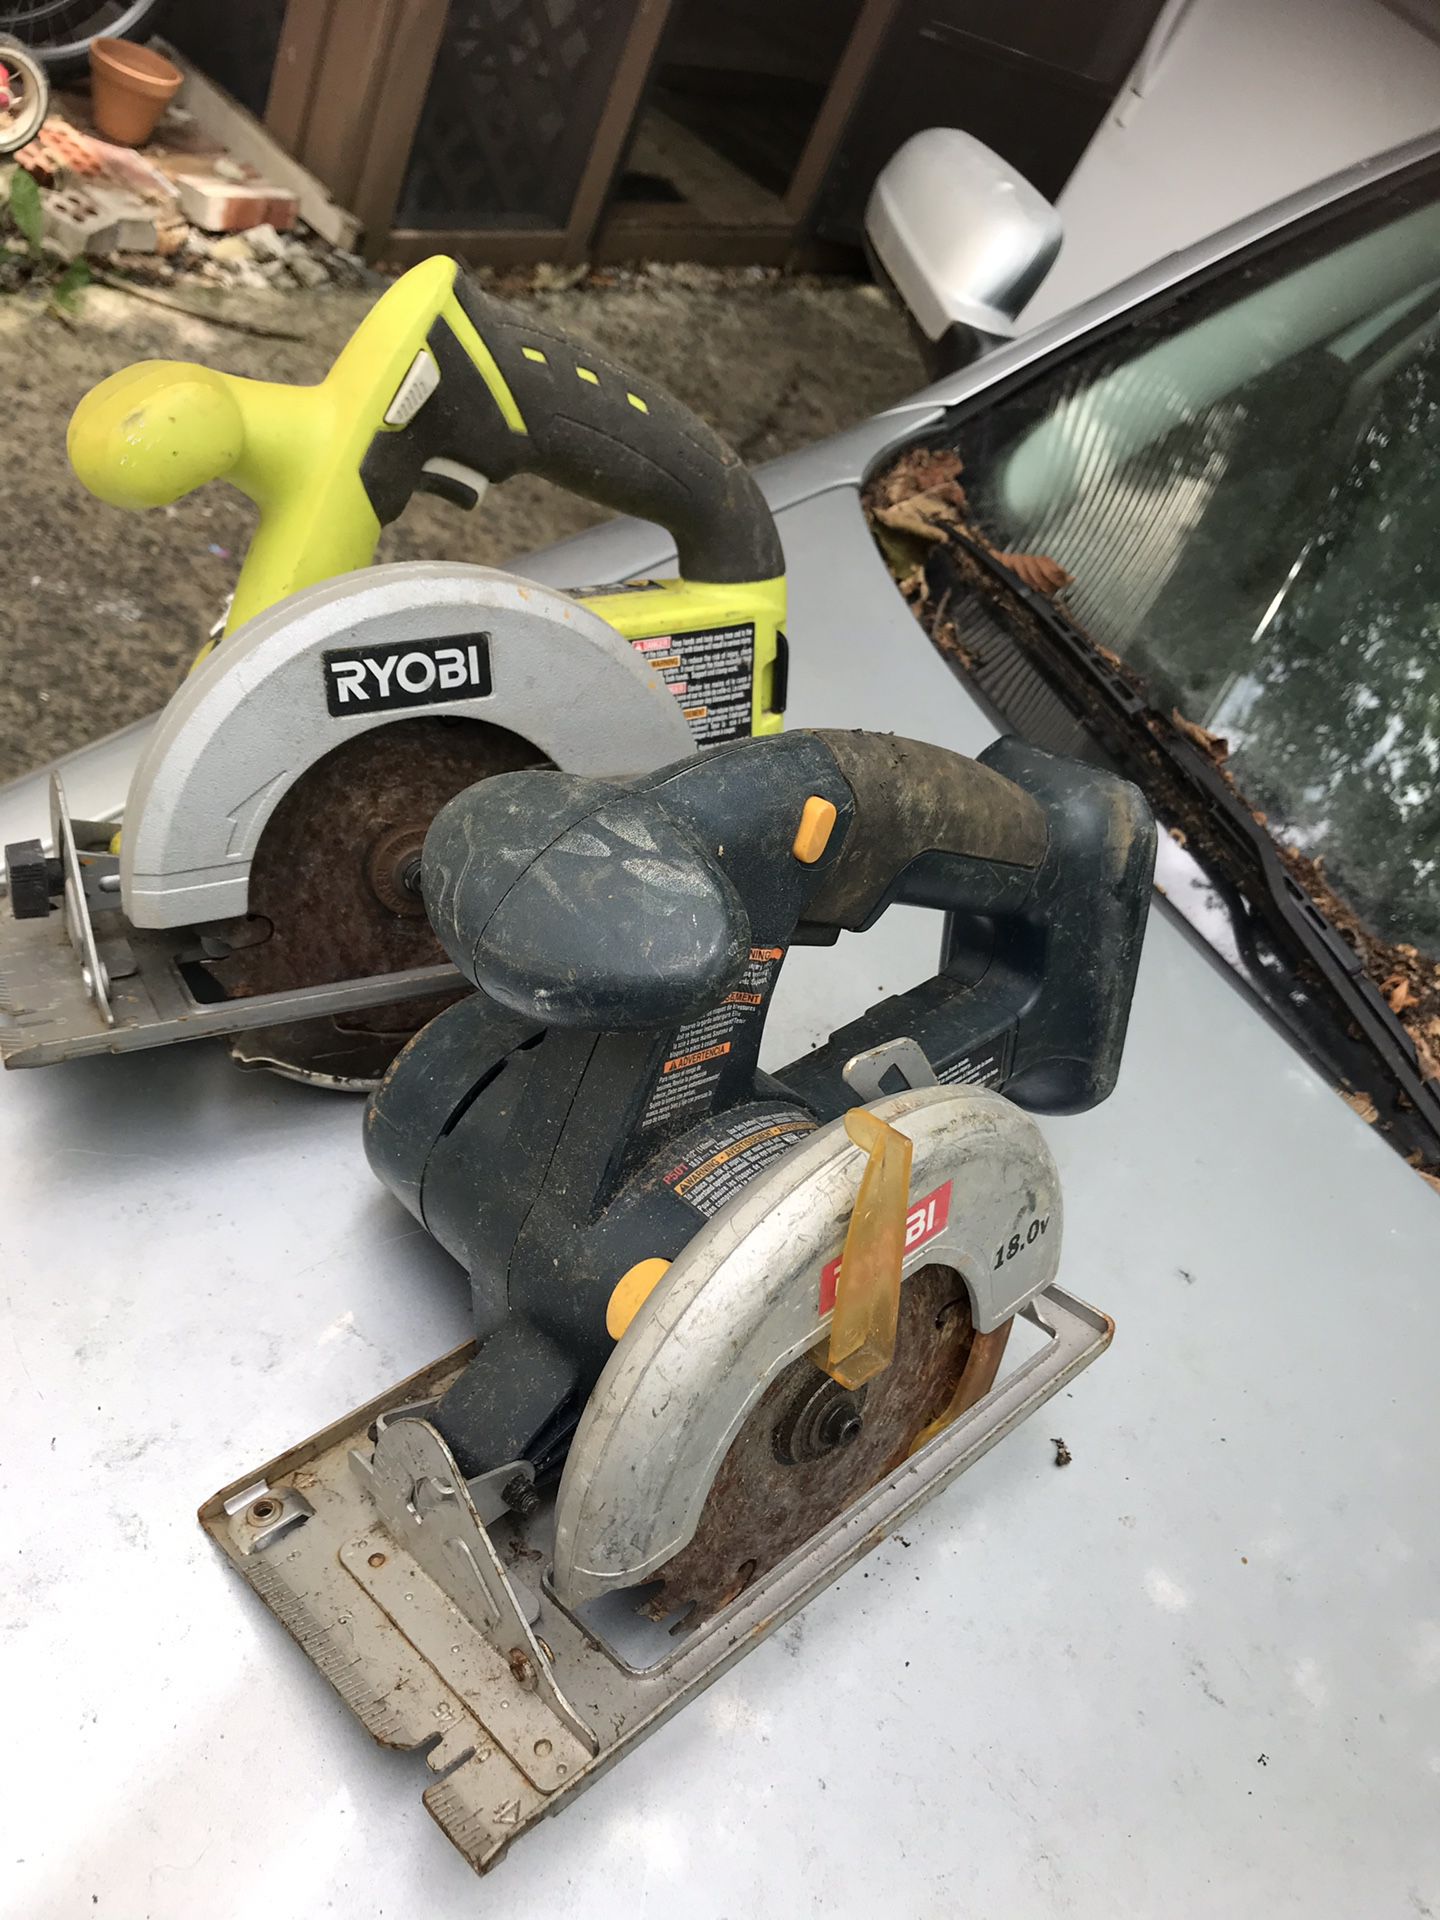 Tow Circular saw with out battery